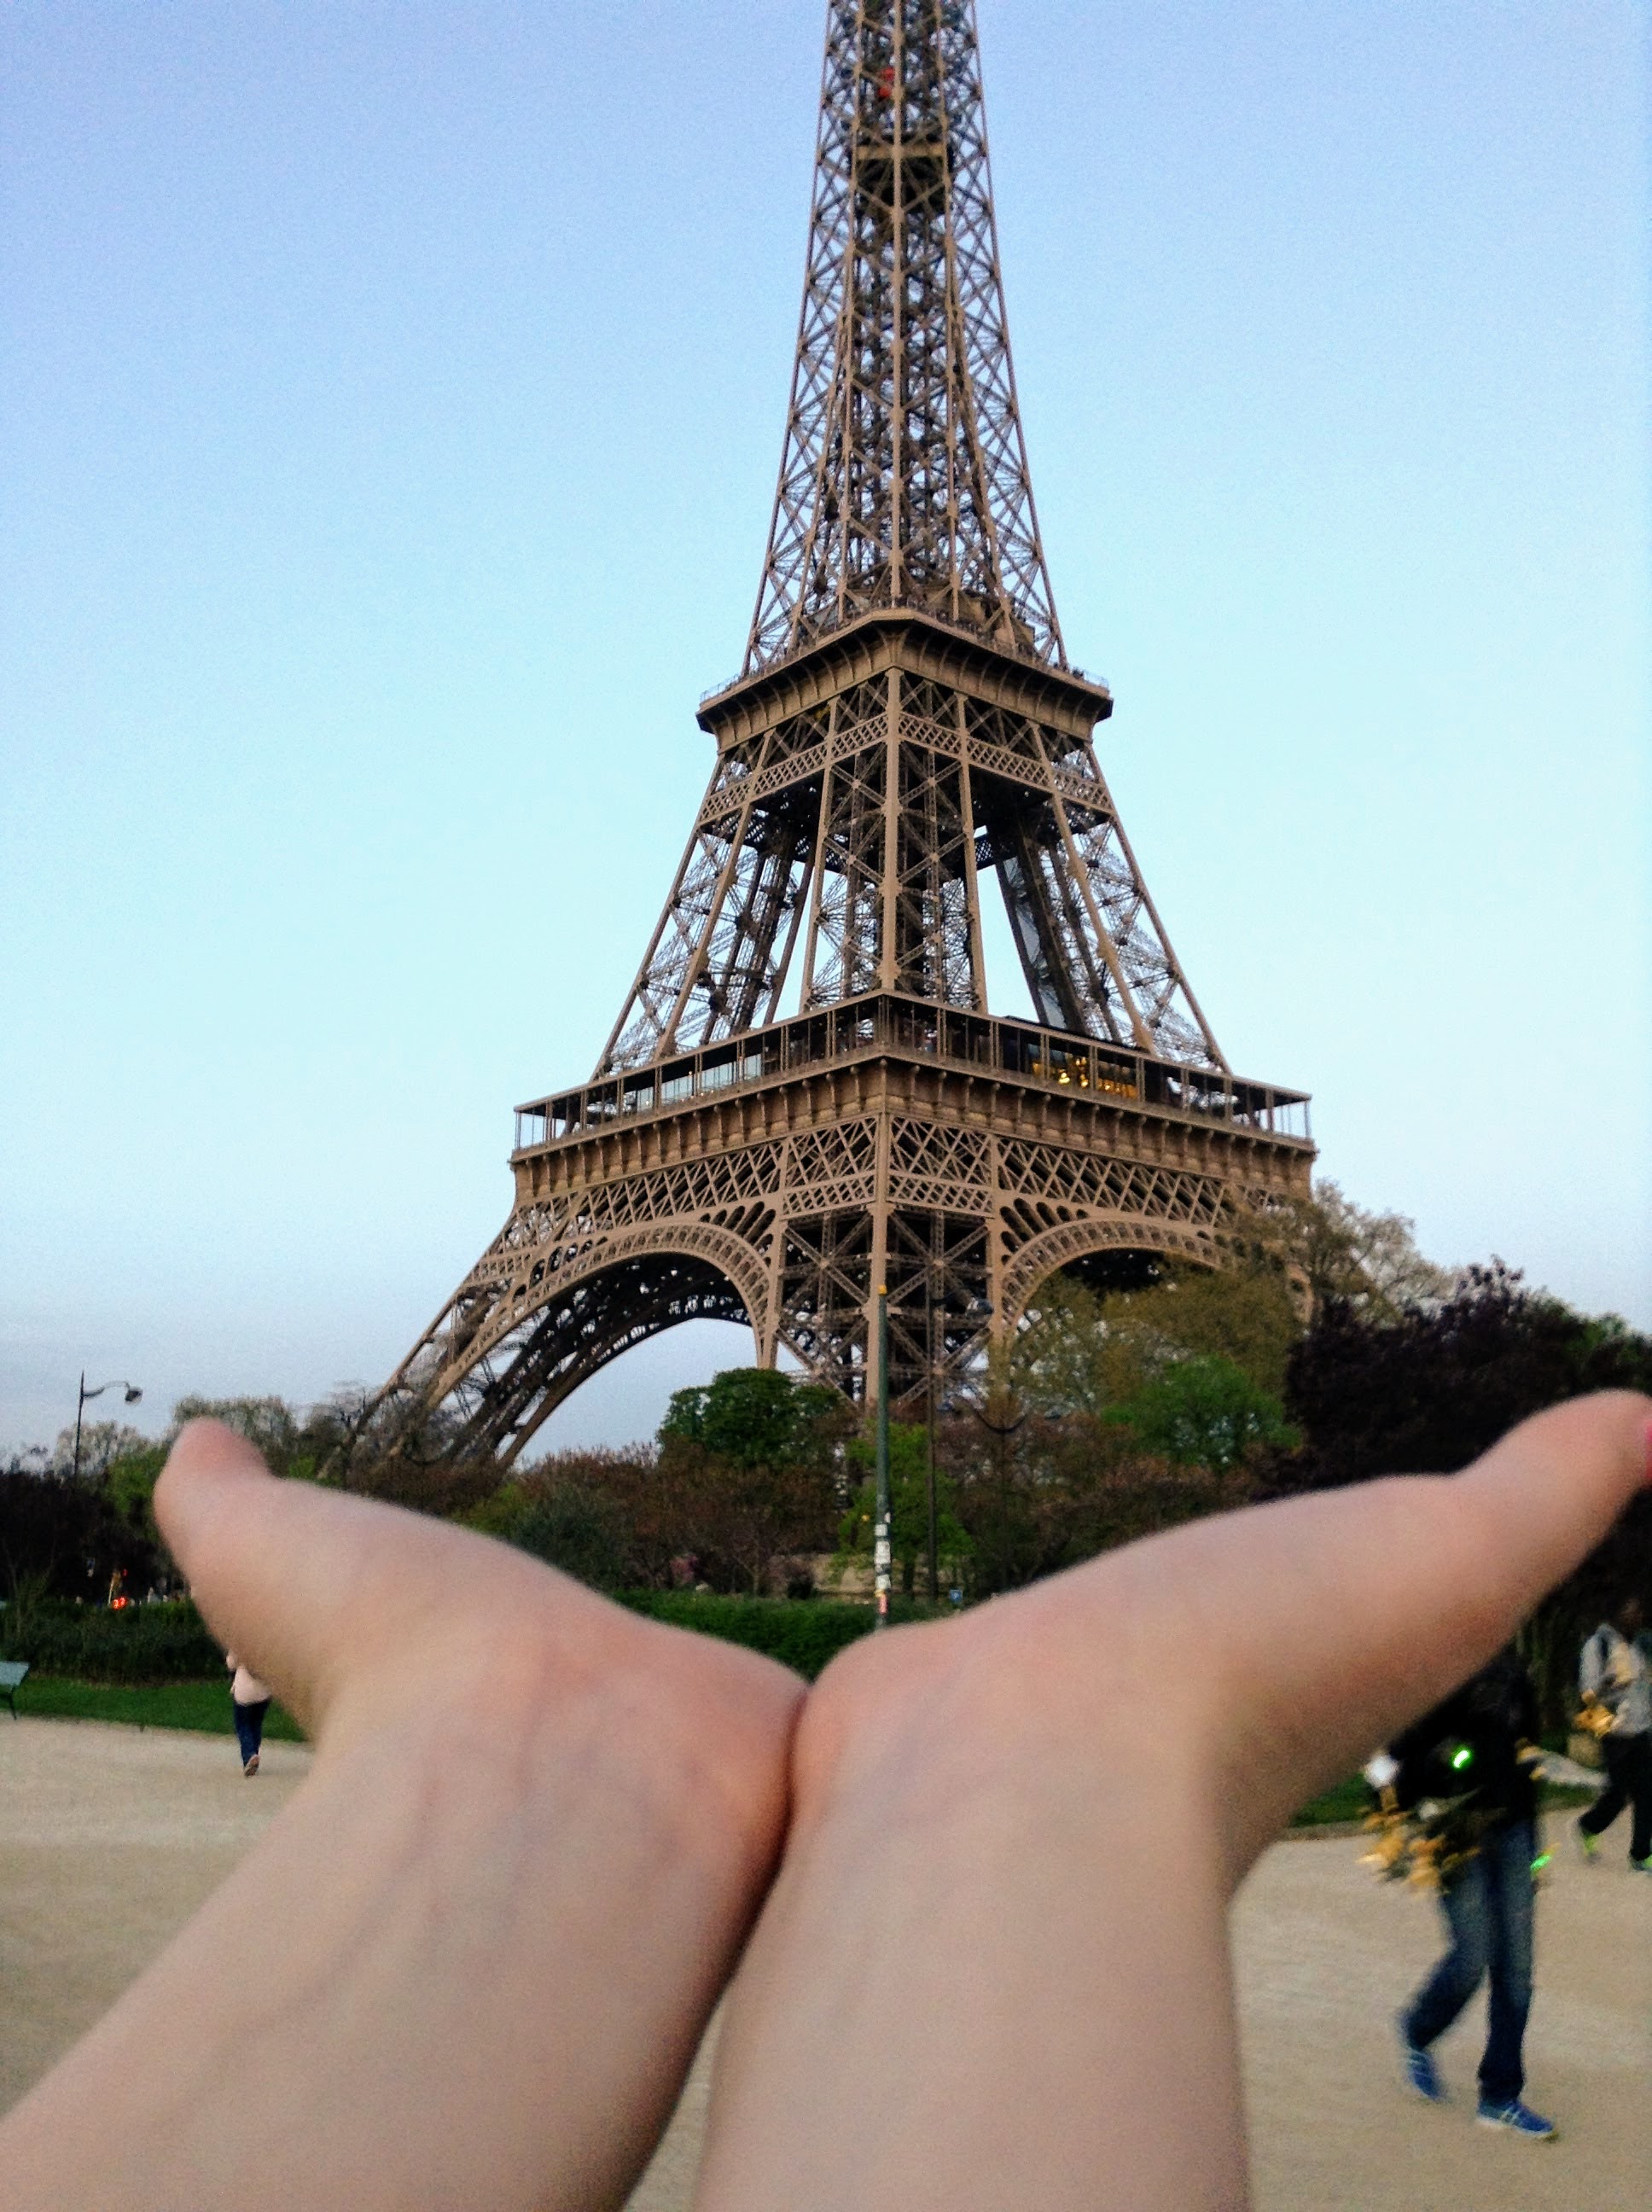 The Eiffel Tower in my hands. Learn how to beat this Paris (and NYC, London and more) cups and balls scam. It looks easy, but there is only one way to beat the hustler and walk away with money. Of course, there are many more ways to lose all your money. You will most likely experience this hustle when you travel to Paris. Our knowledge will help you to beat it! Click and learn. #TravelTips #travel #EuropeTravel #ShellGame #Scam #OurCarpeDiem #Paris #France